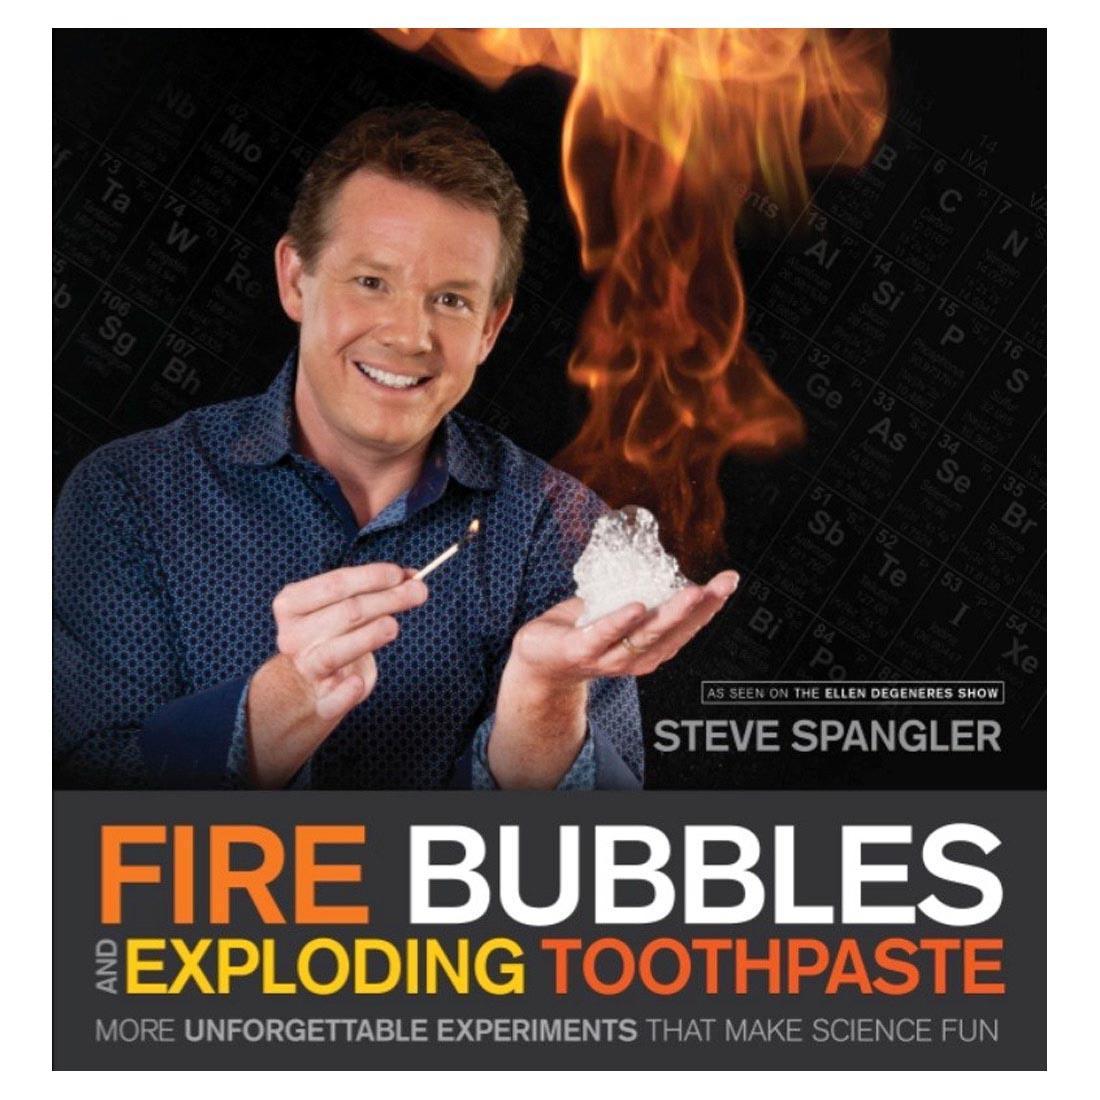 Fire Bubbles And Exploring Toothpaste: More Unforgettable Experiments That Make Science Fun